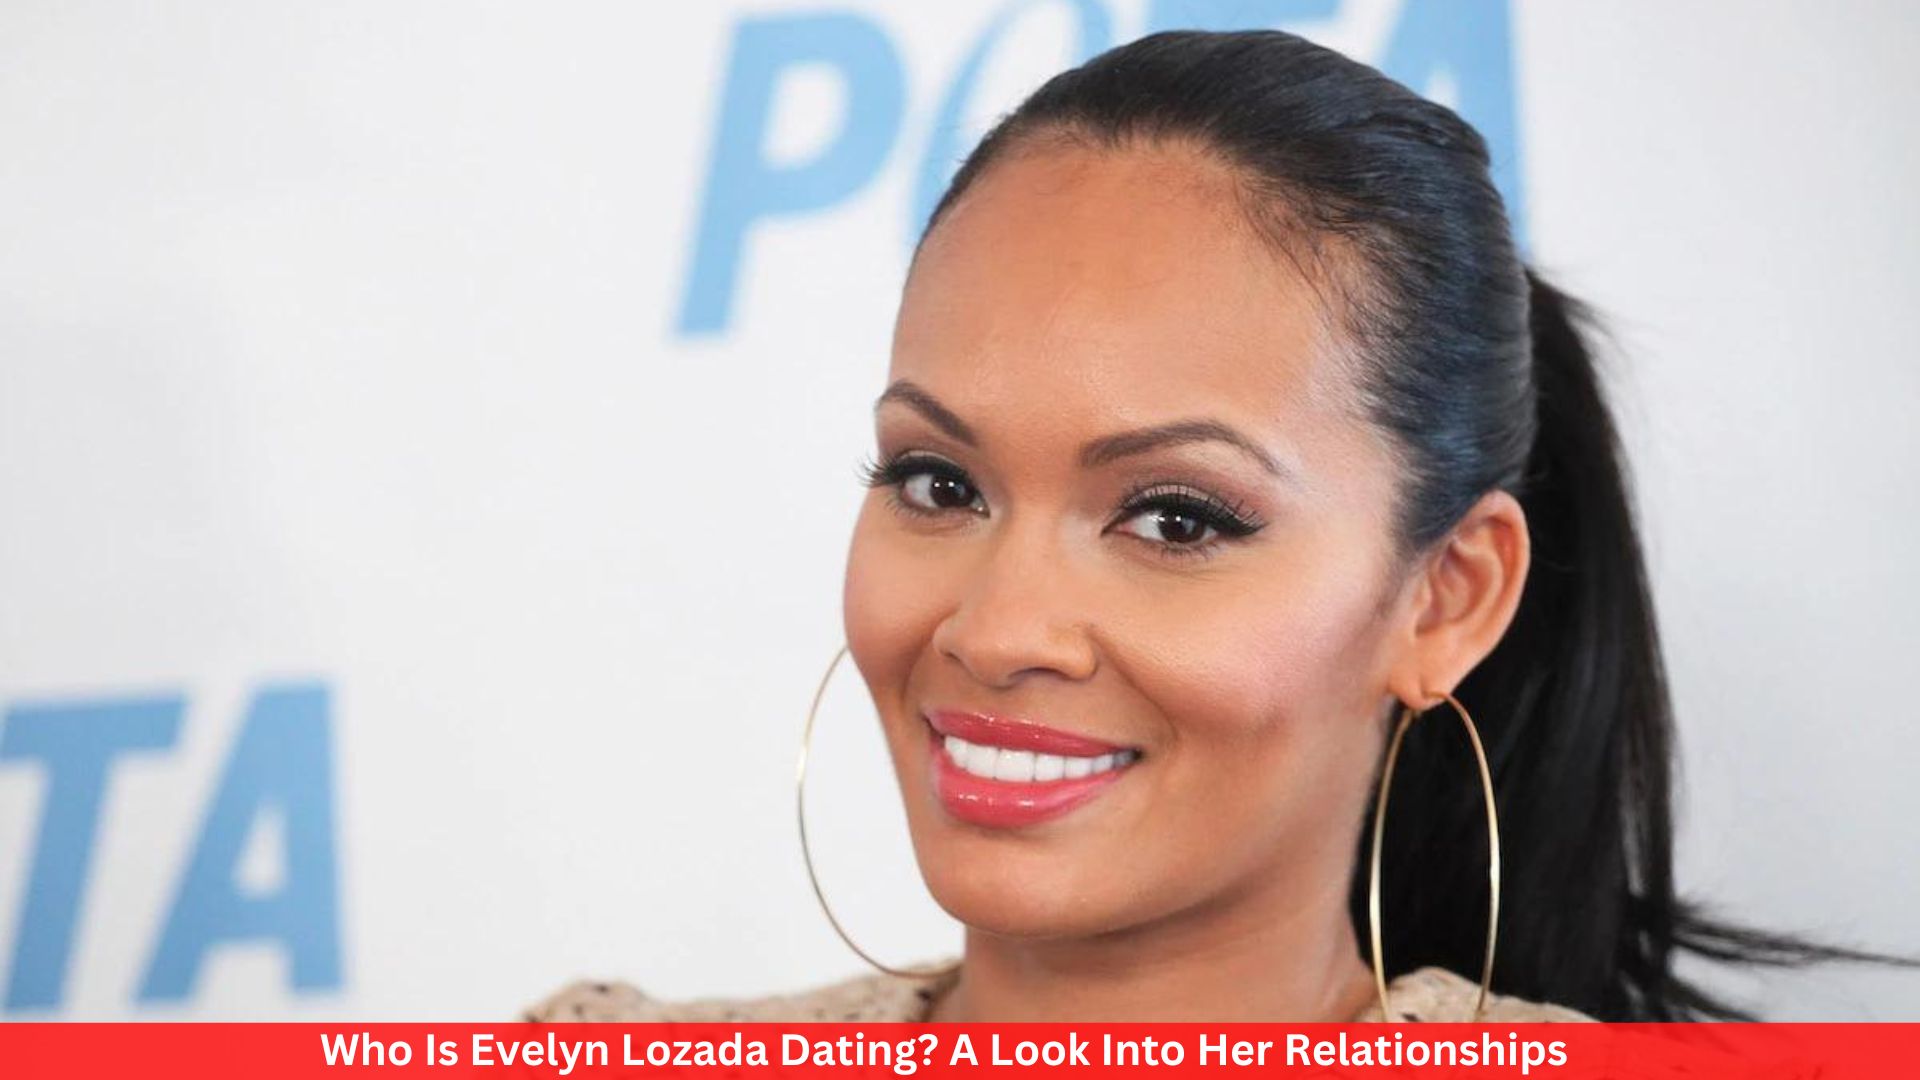 Who Is Evelyn Lozada Dating? A Look Into Her Relationships